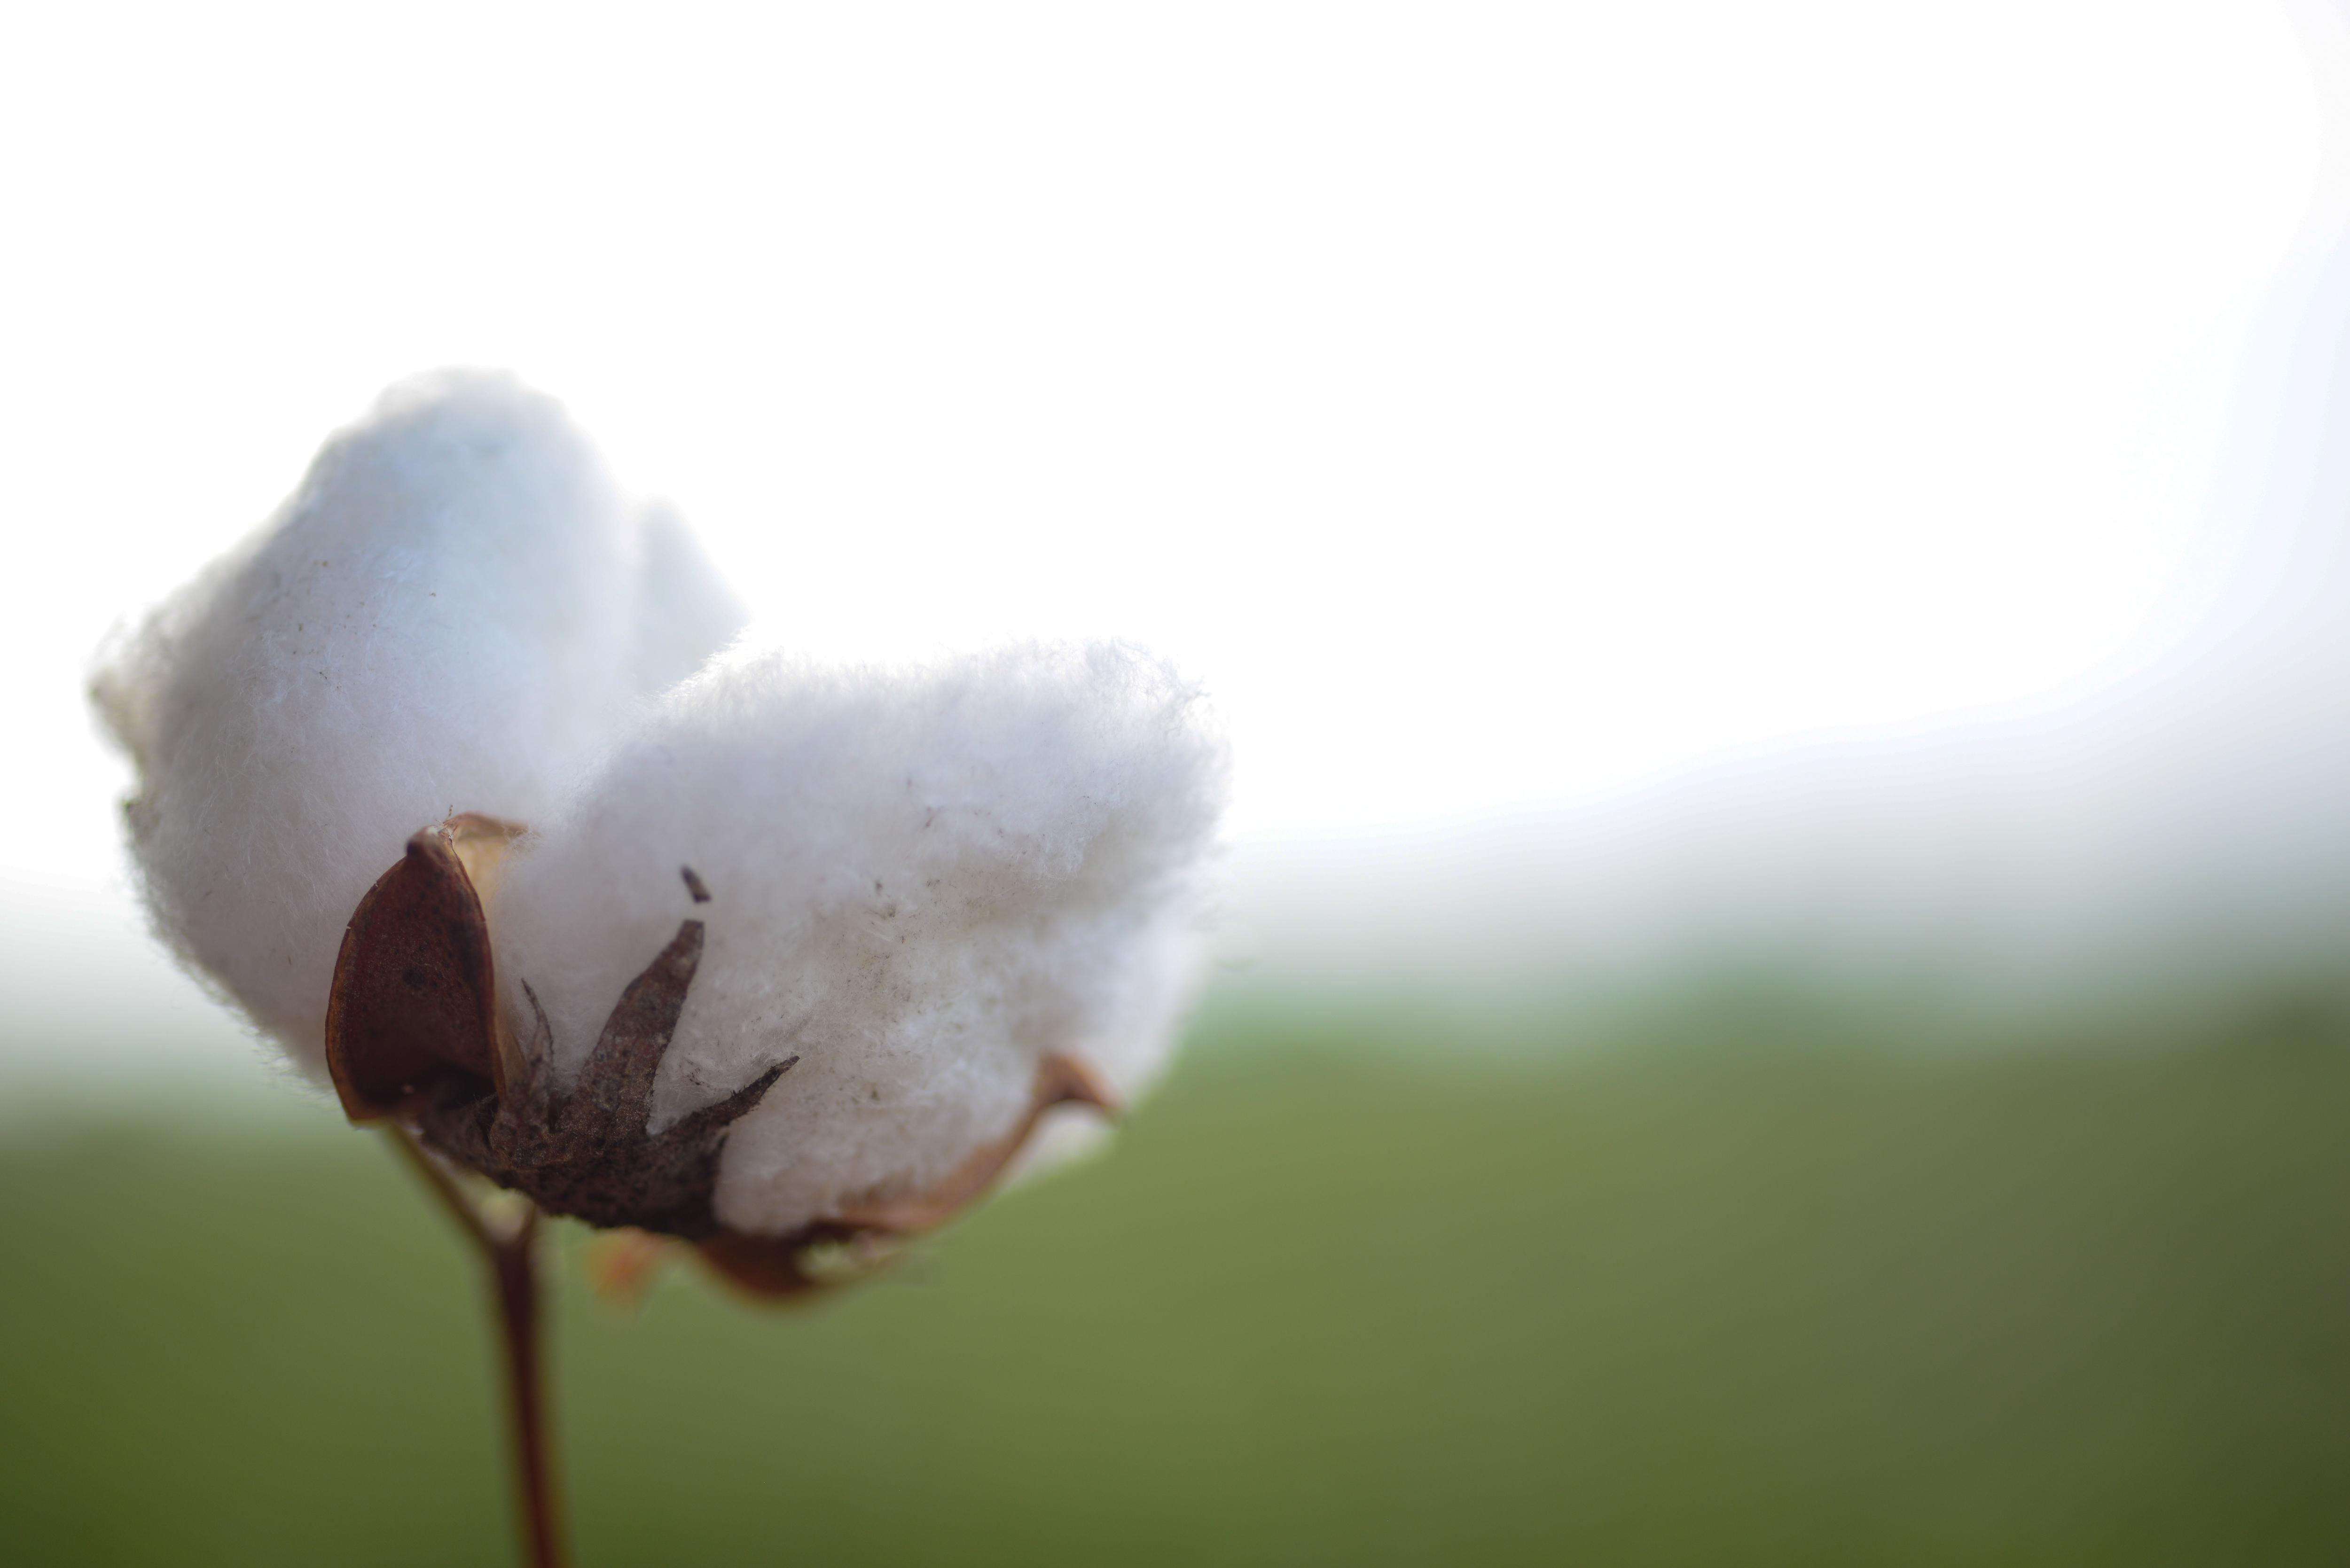 The role of organic cotton in creating a sustainable cotton supply chain